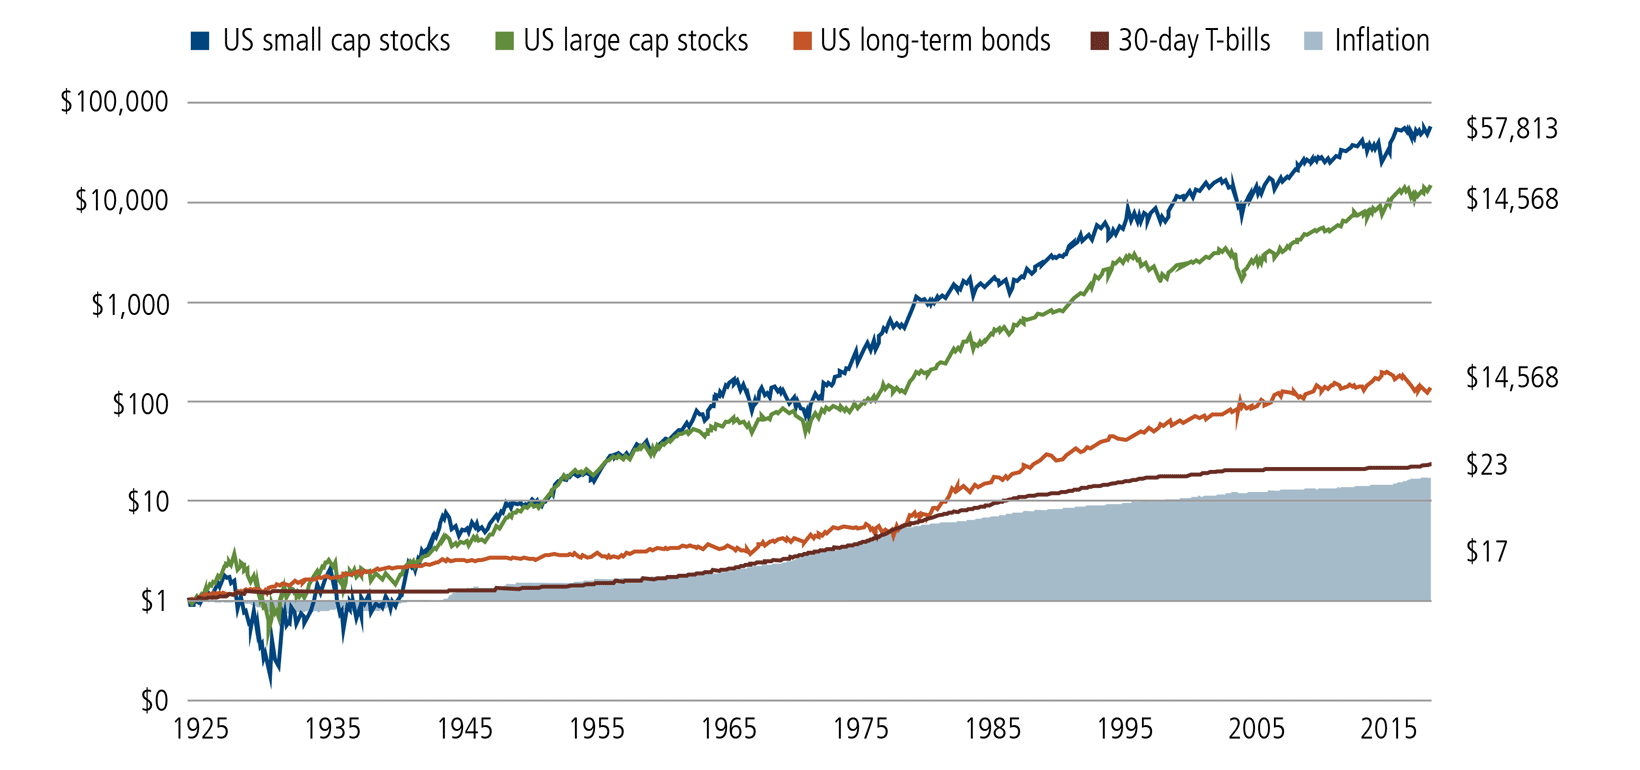 growth of US small caps, US large caps, US long-term bonds, 30-day T-bills, and inflation